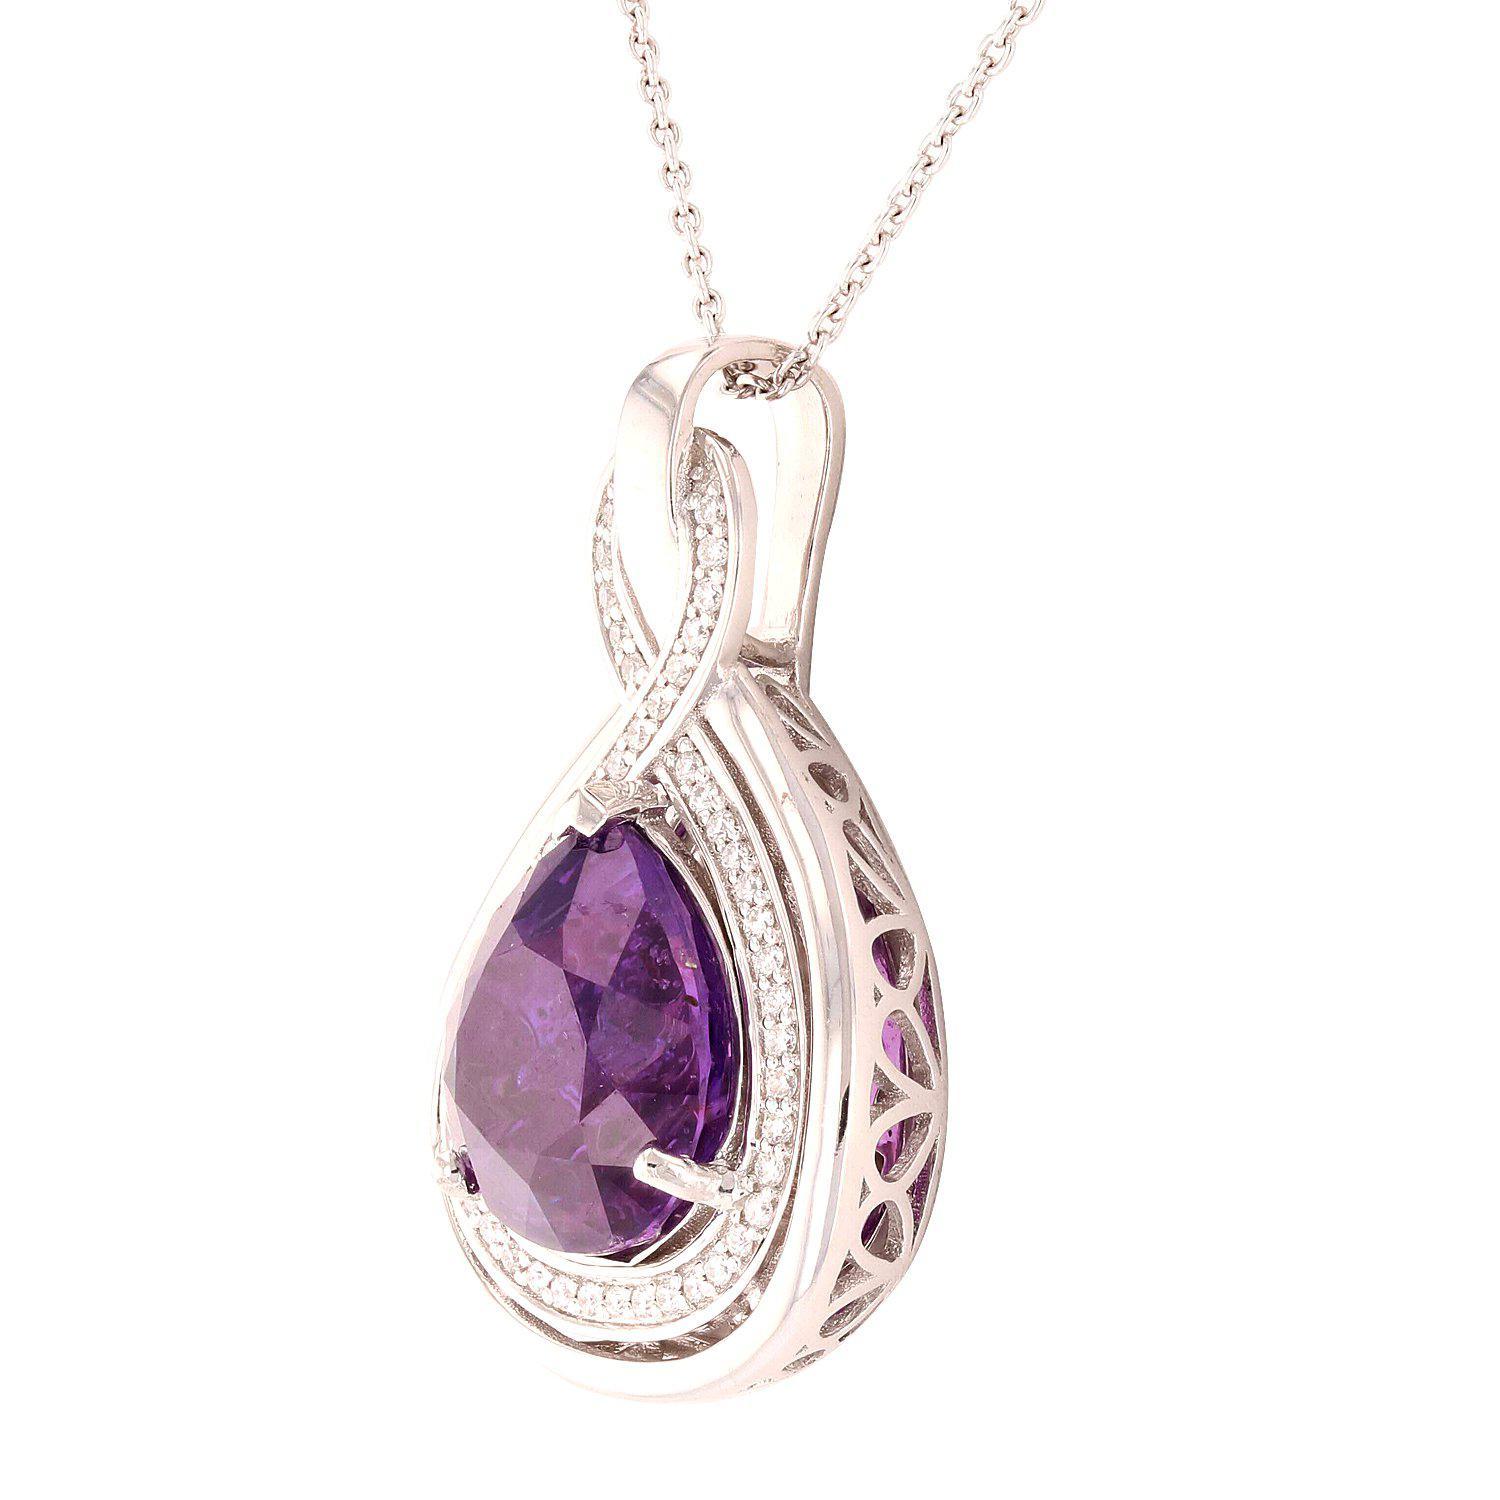 One electronically tested platinum ladies cast & assembled purple sapphire and diamond pendant with chain. Condition is new, good workmanship. The pendant features a purple sapphire set within a stylized diamond bezel, completed by a diamond set